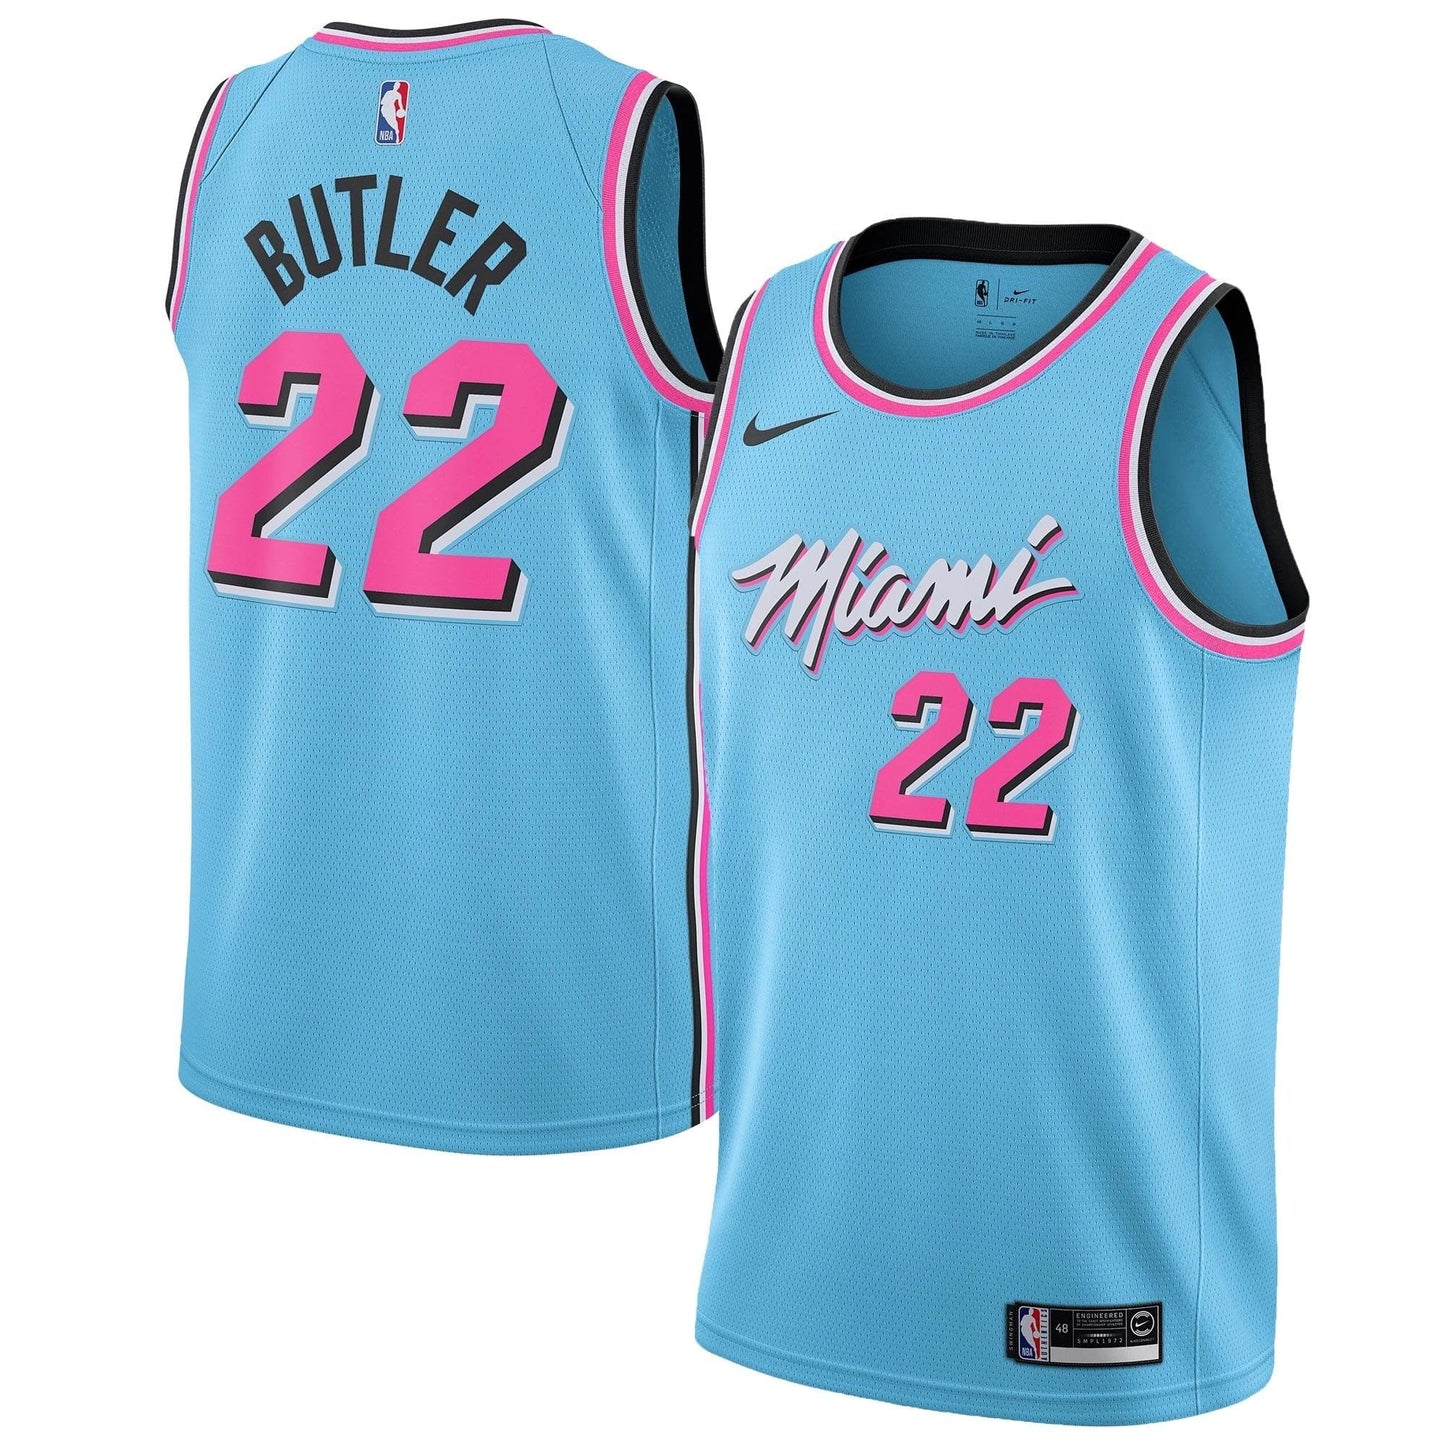 Jimmy Butler Miami Heat Vice City Edition Jersey